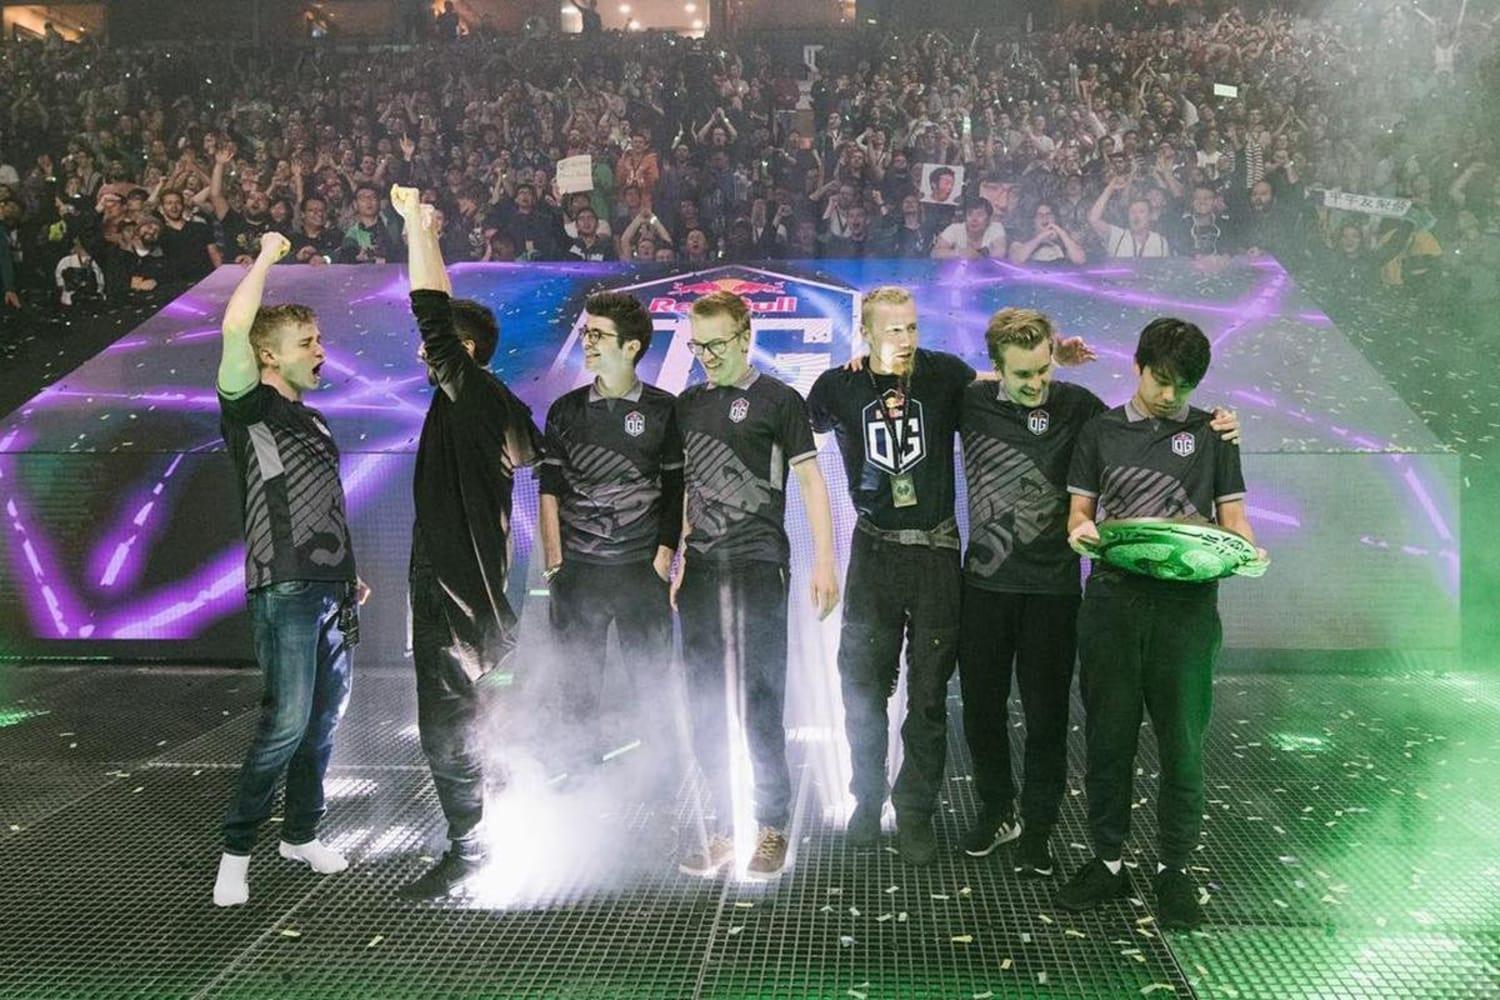 Find Out What to Do to Become a Professional Dota 2 Player